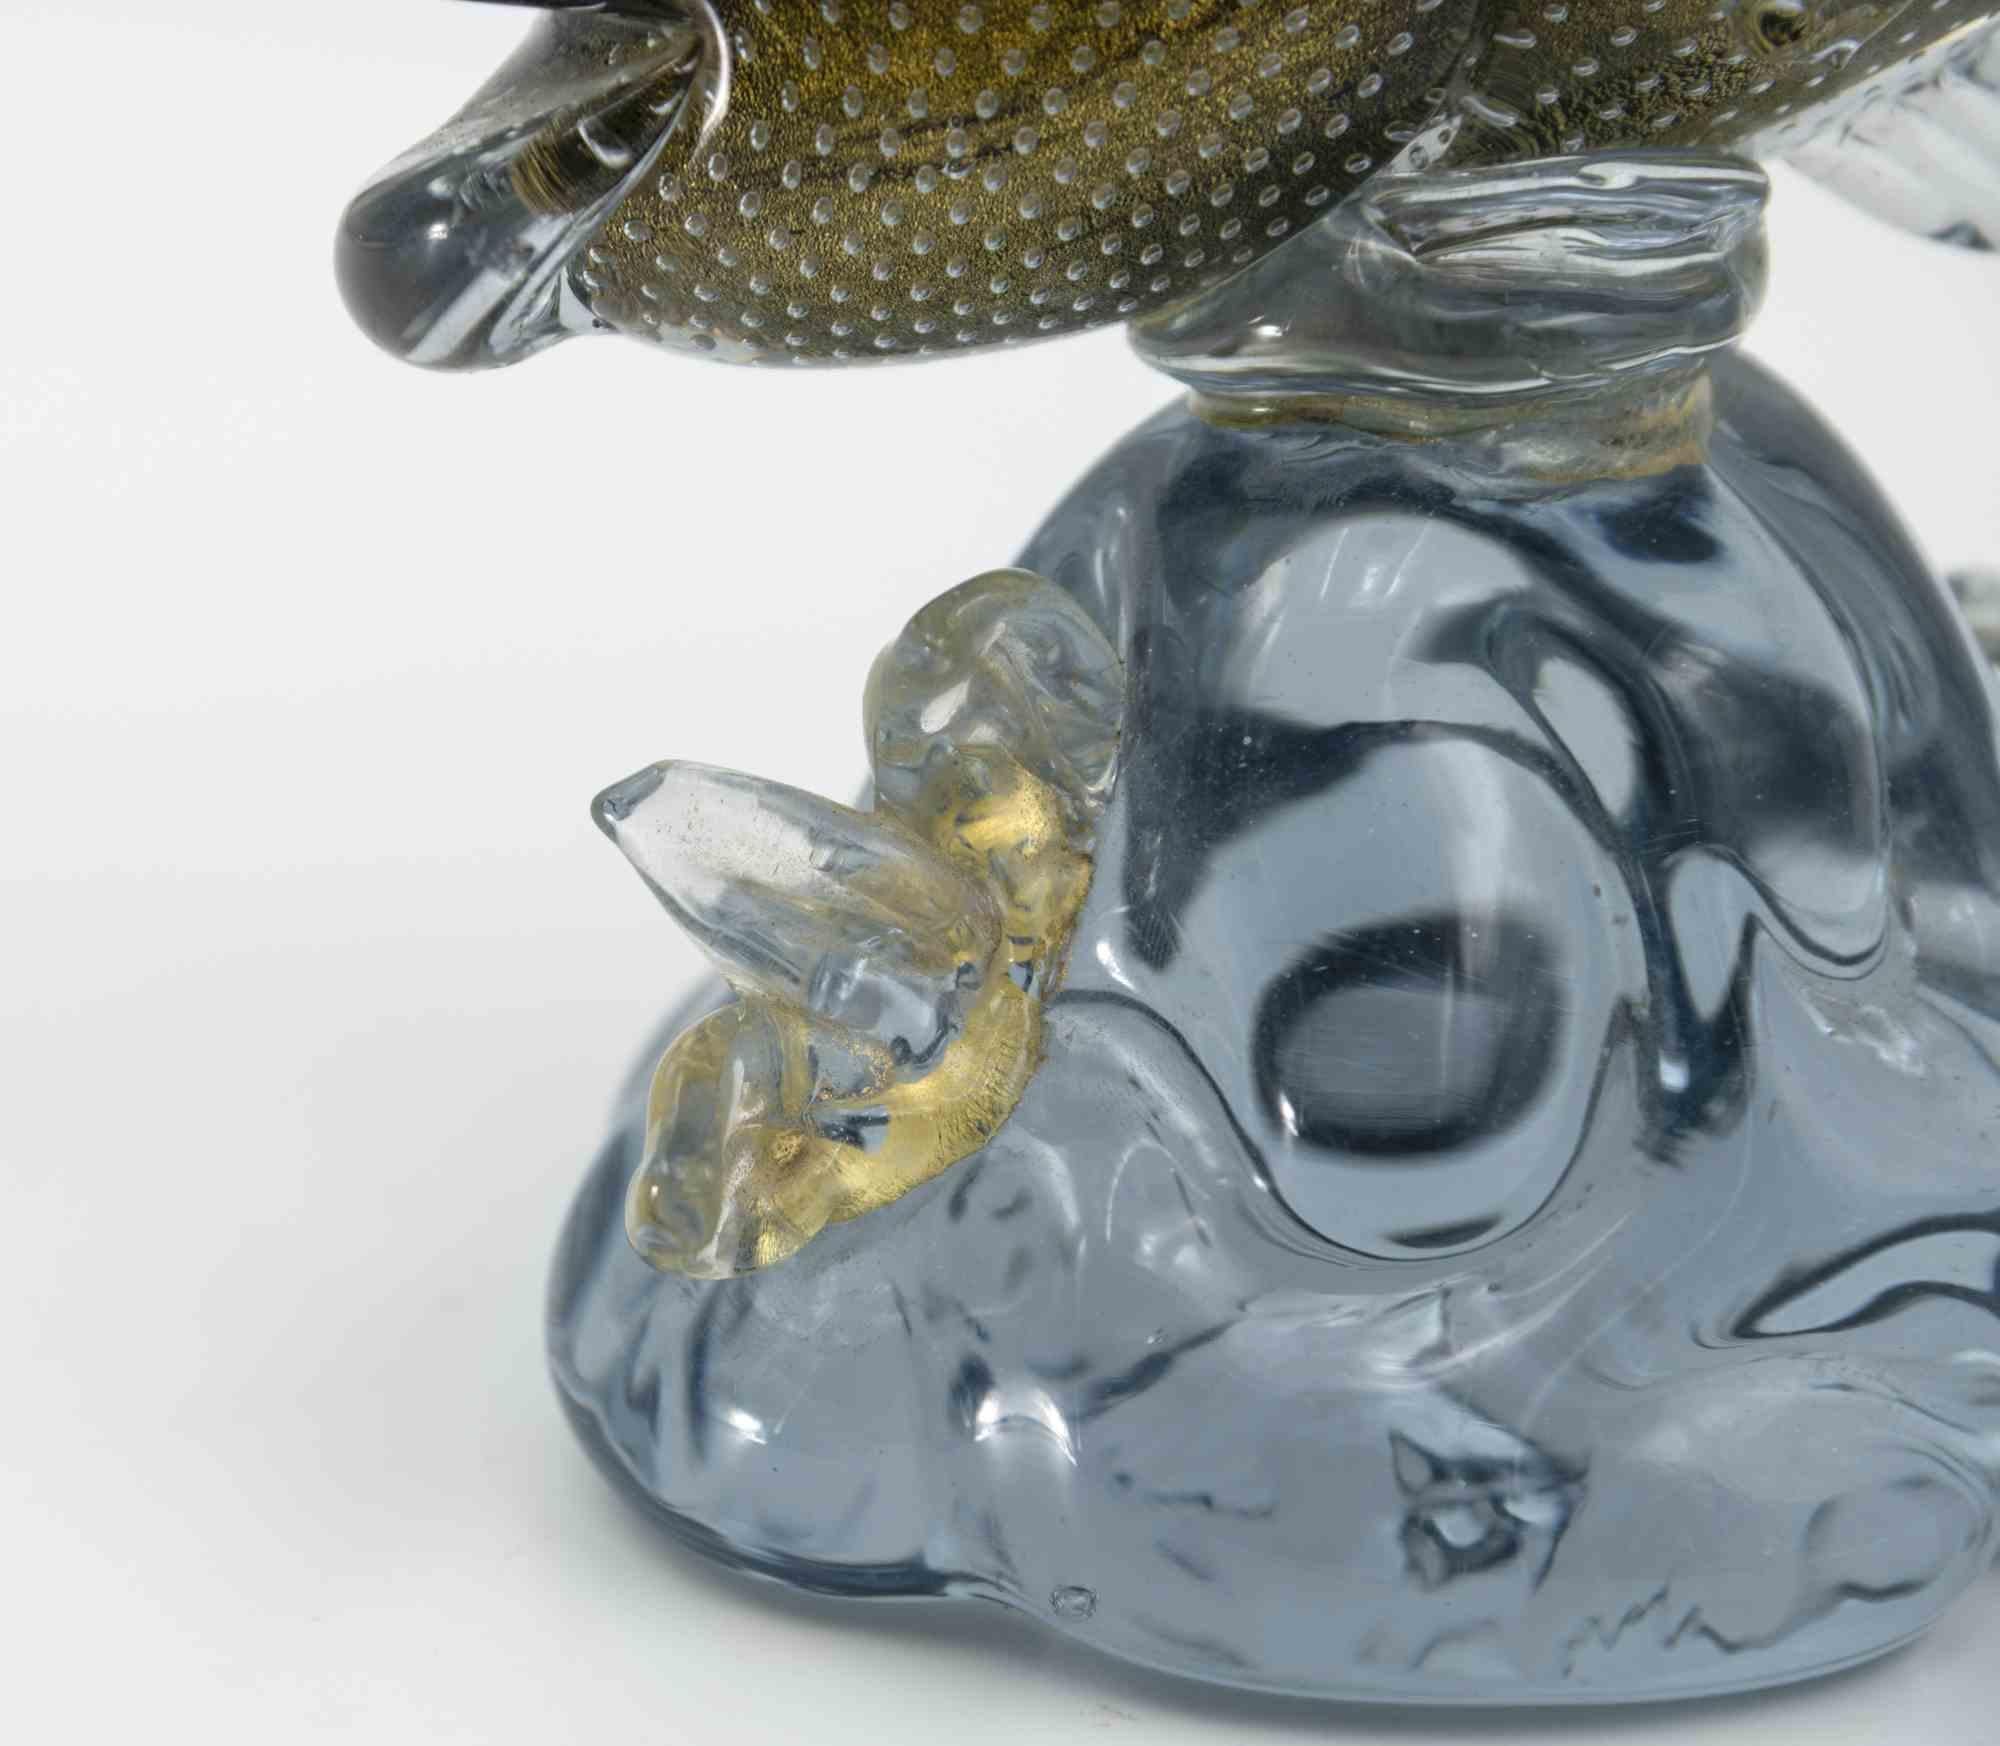 Murano glass carp Is a beautiful glass decorative object, realized by Murano manufacture following the japanese style in the late 20th Century.

This object belongs to the exclusive and nice collection of Murano glass animals made through a